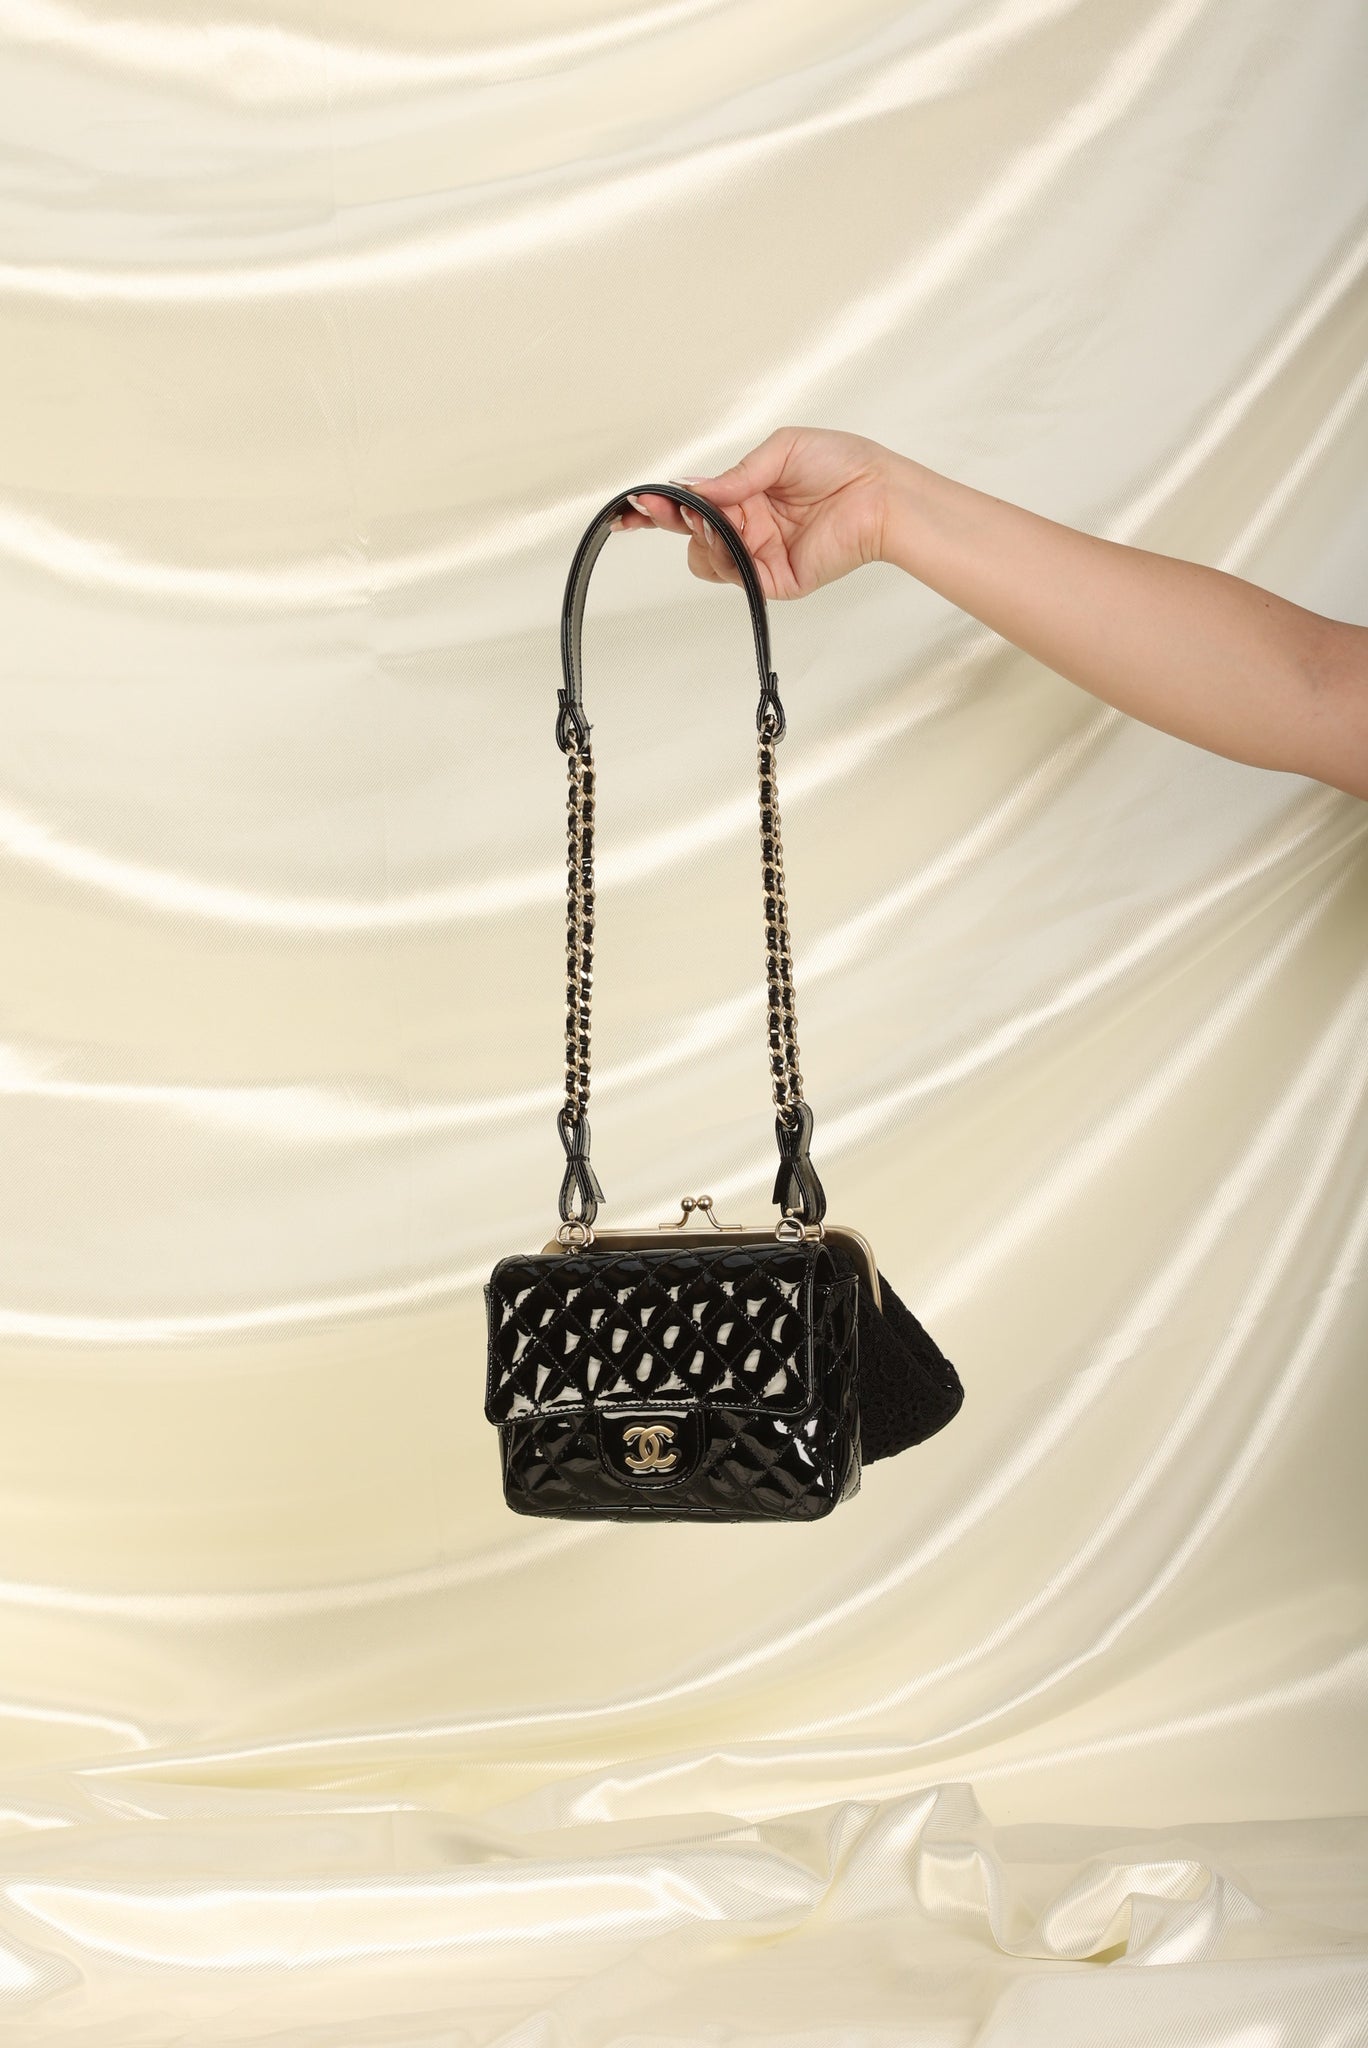 Will Chanel Fix My Bag? Everything You Need to Know About Chanel